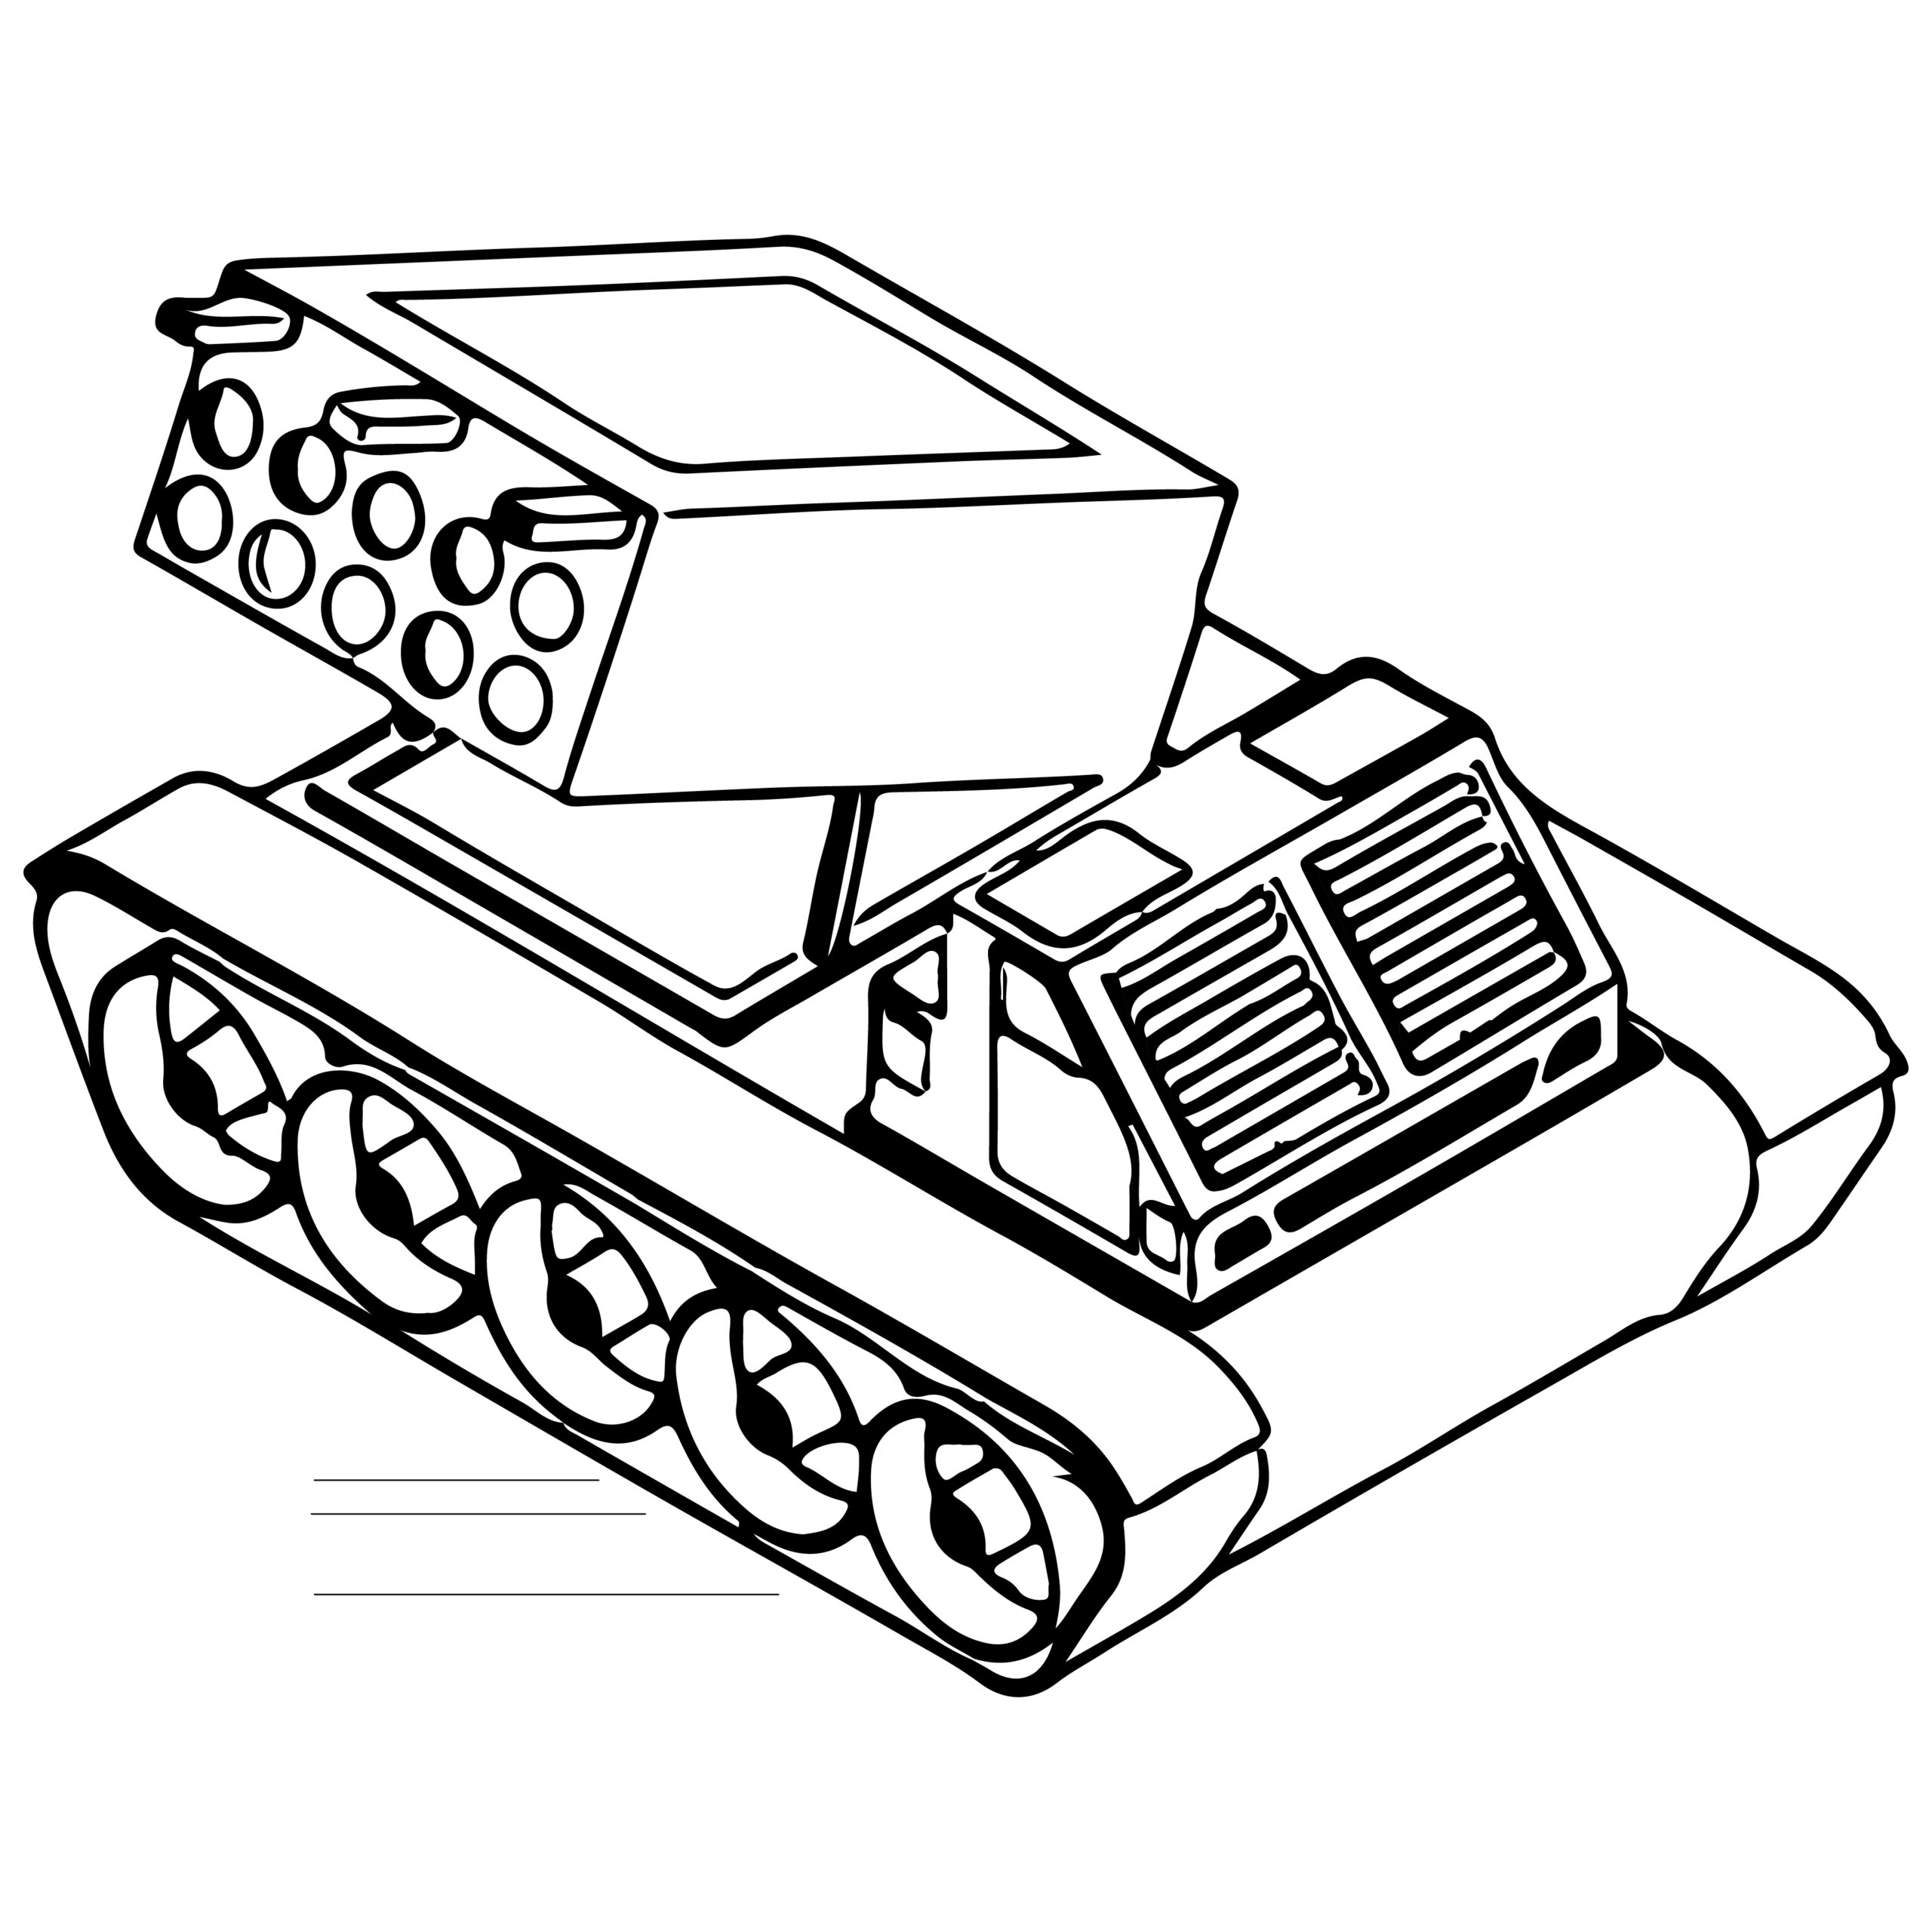 Tanks coloring book tanks coloring pages made by teachers